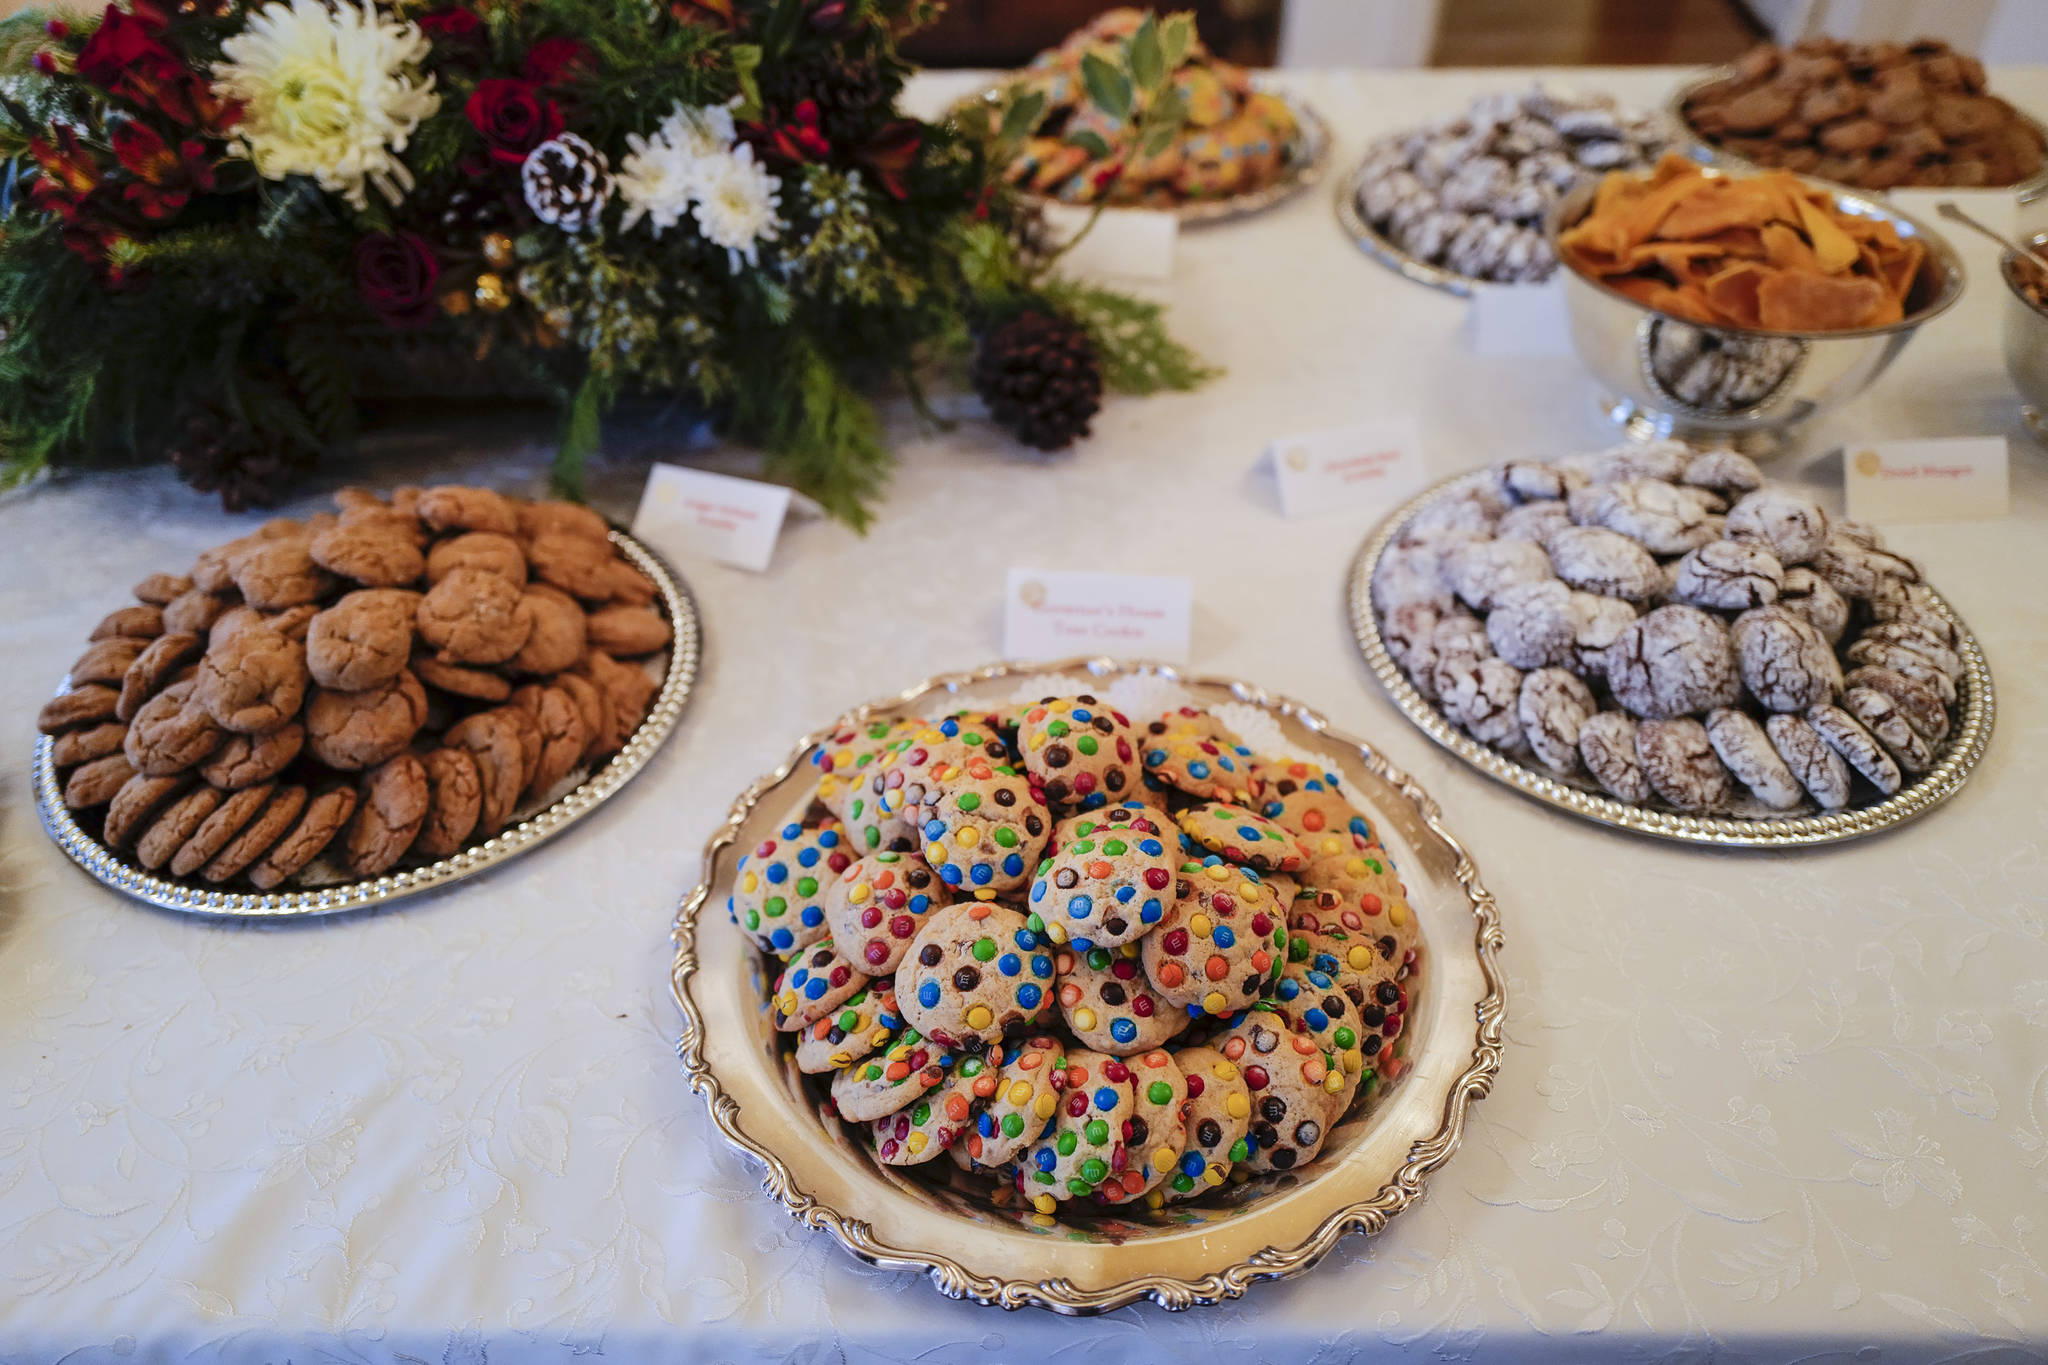 Cookies at the Governor’s Open House on Tuesday, Dec. 10, 2019. (Michael Penn | Juneau Empire)